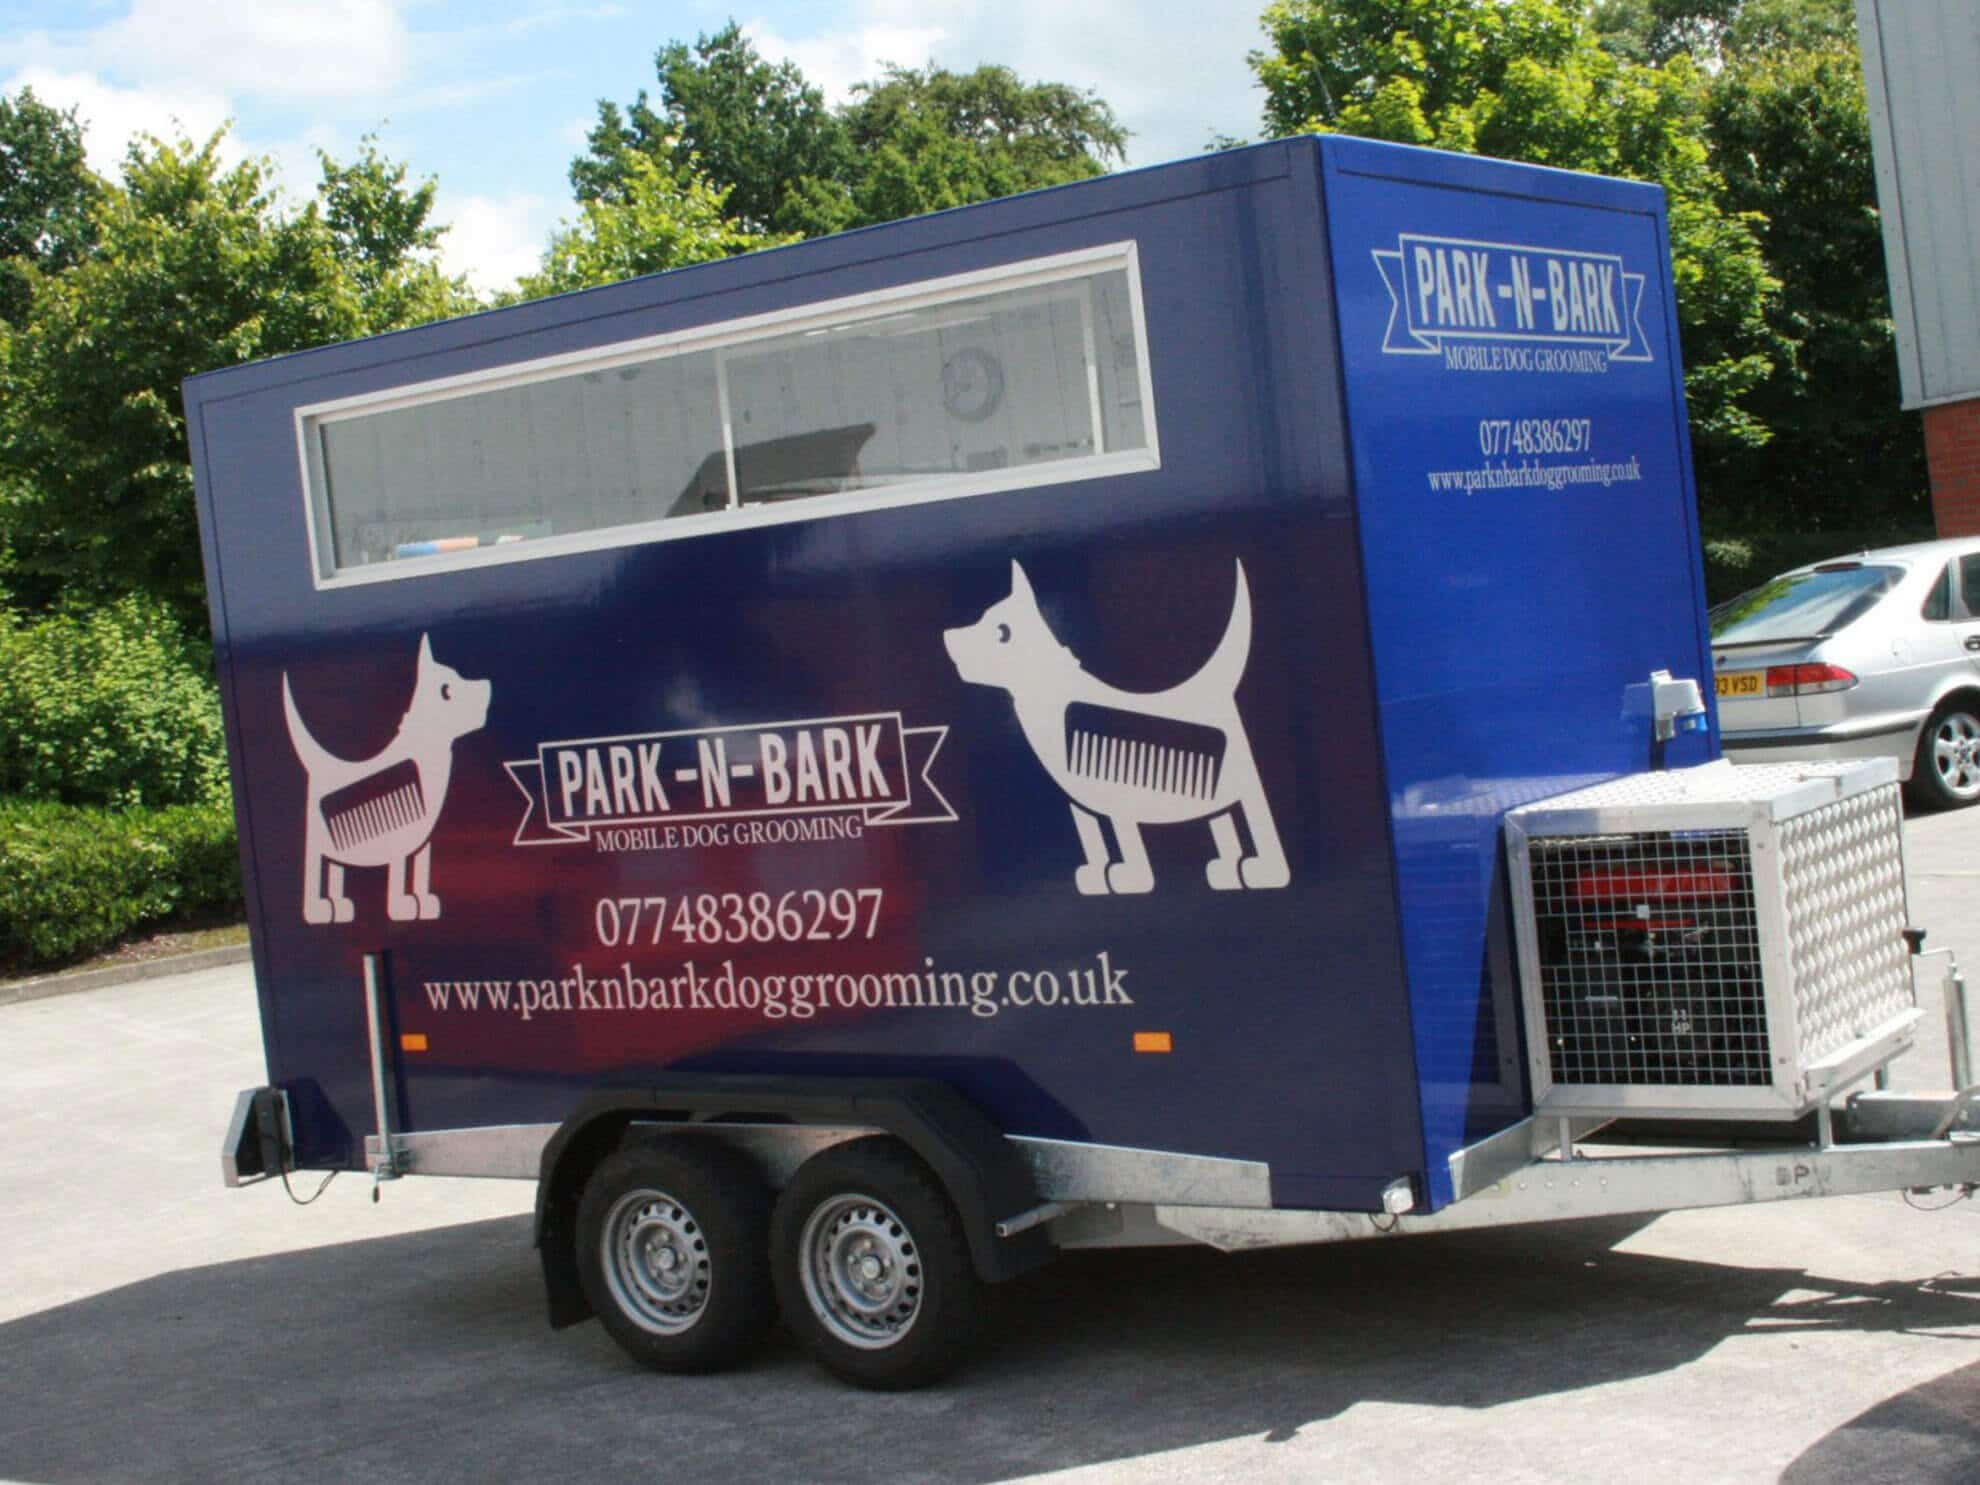 Park 'N' Bark trailer cut vinyl vehicle graphics and wrapping